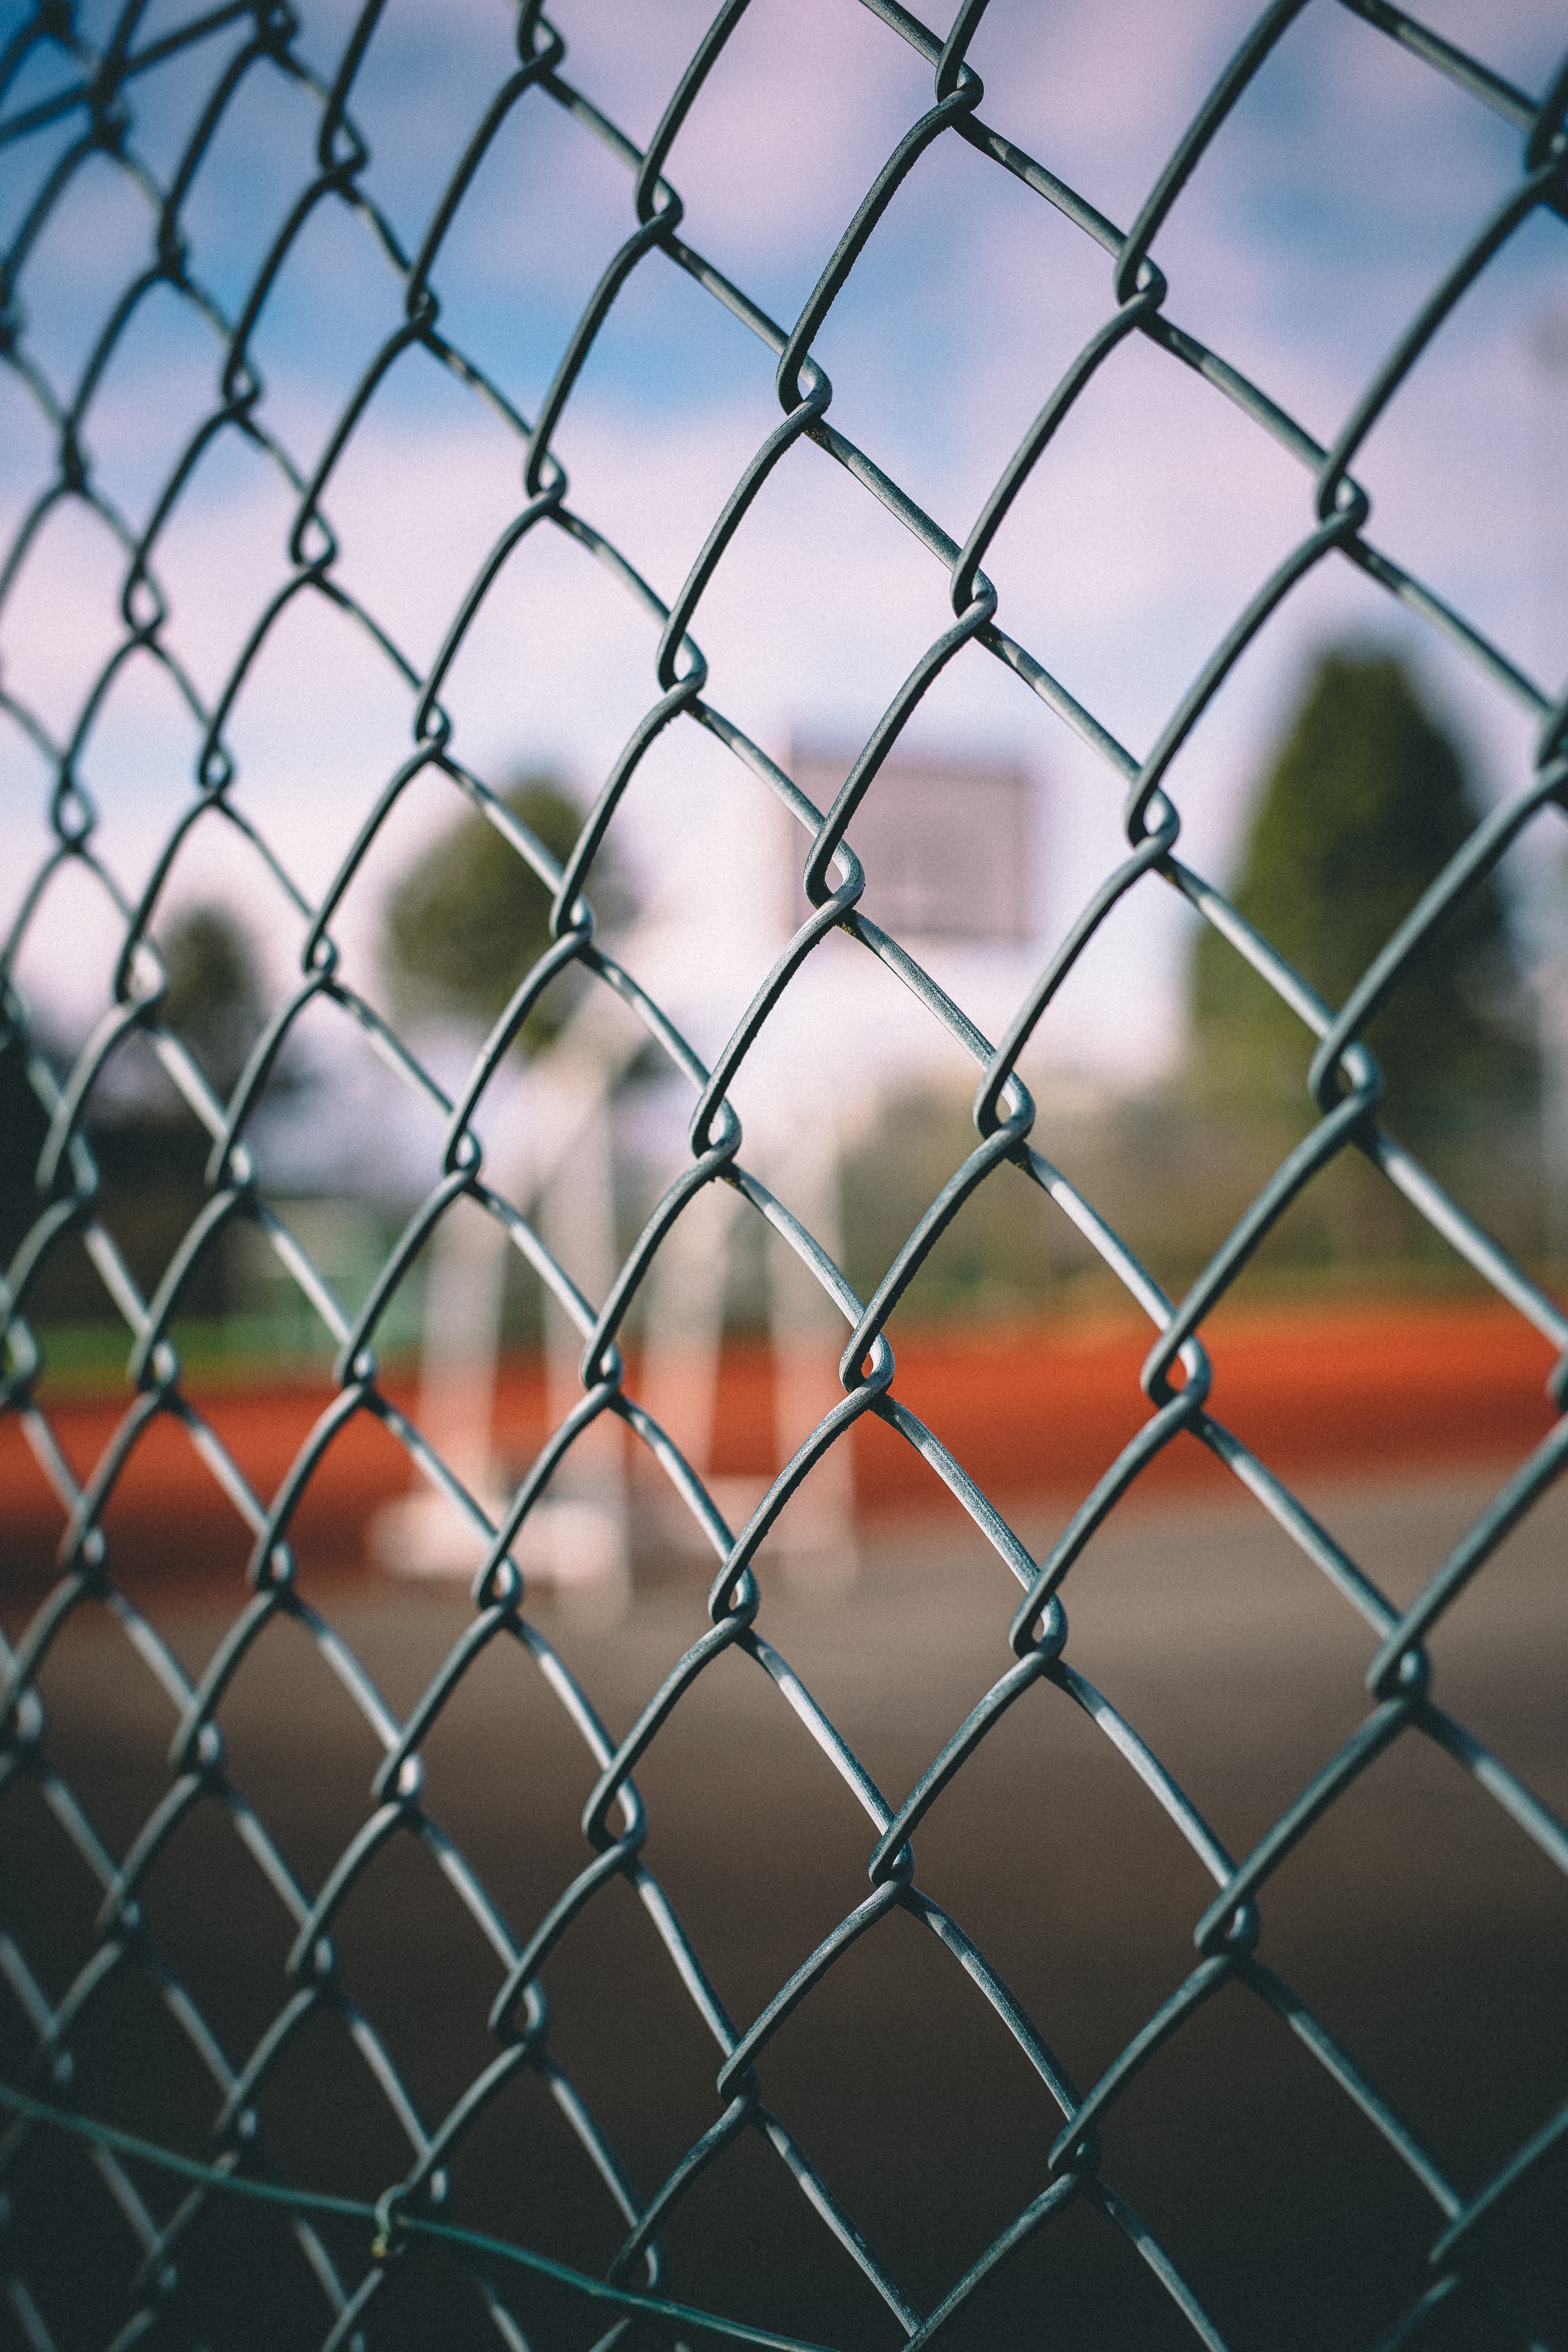 fence, miscellanea, miscellaneous, blur, smooth, grid, fencing, enclosure lock screen backgrounds